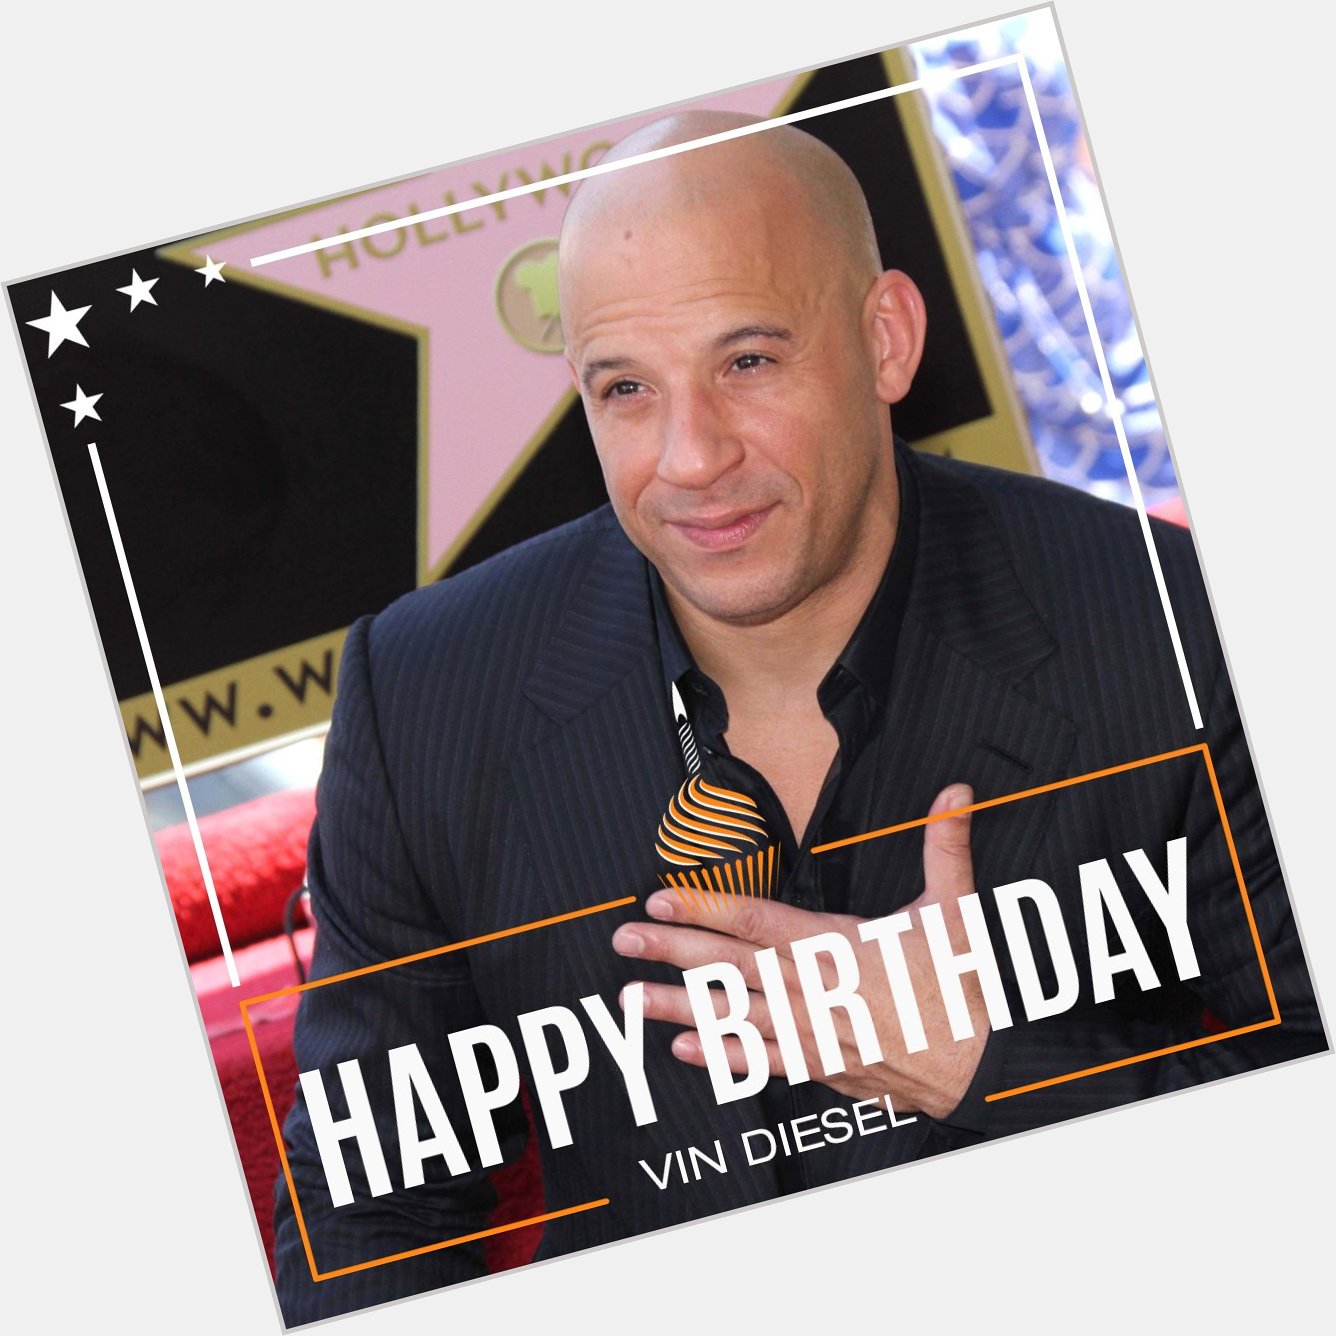 We want to wish Star Vin Diesel a big happy birthday.
We hope you have an explosive one 